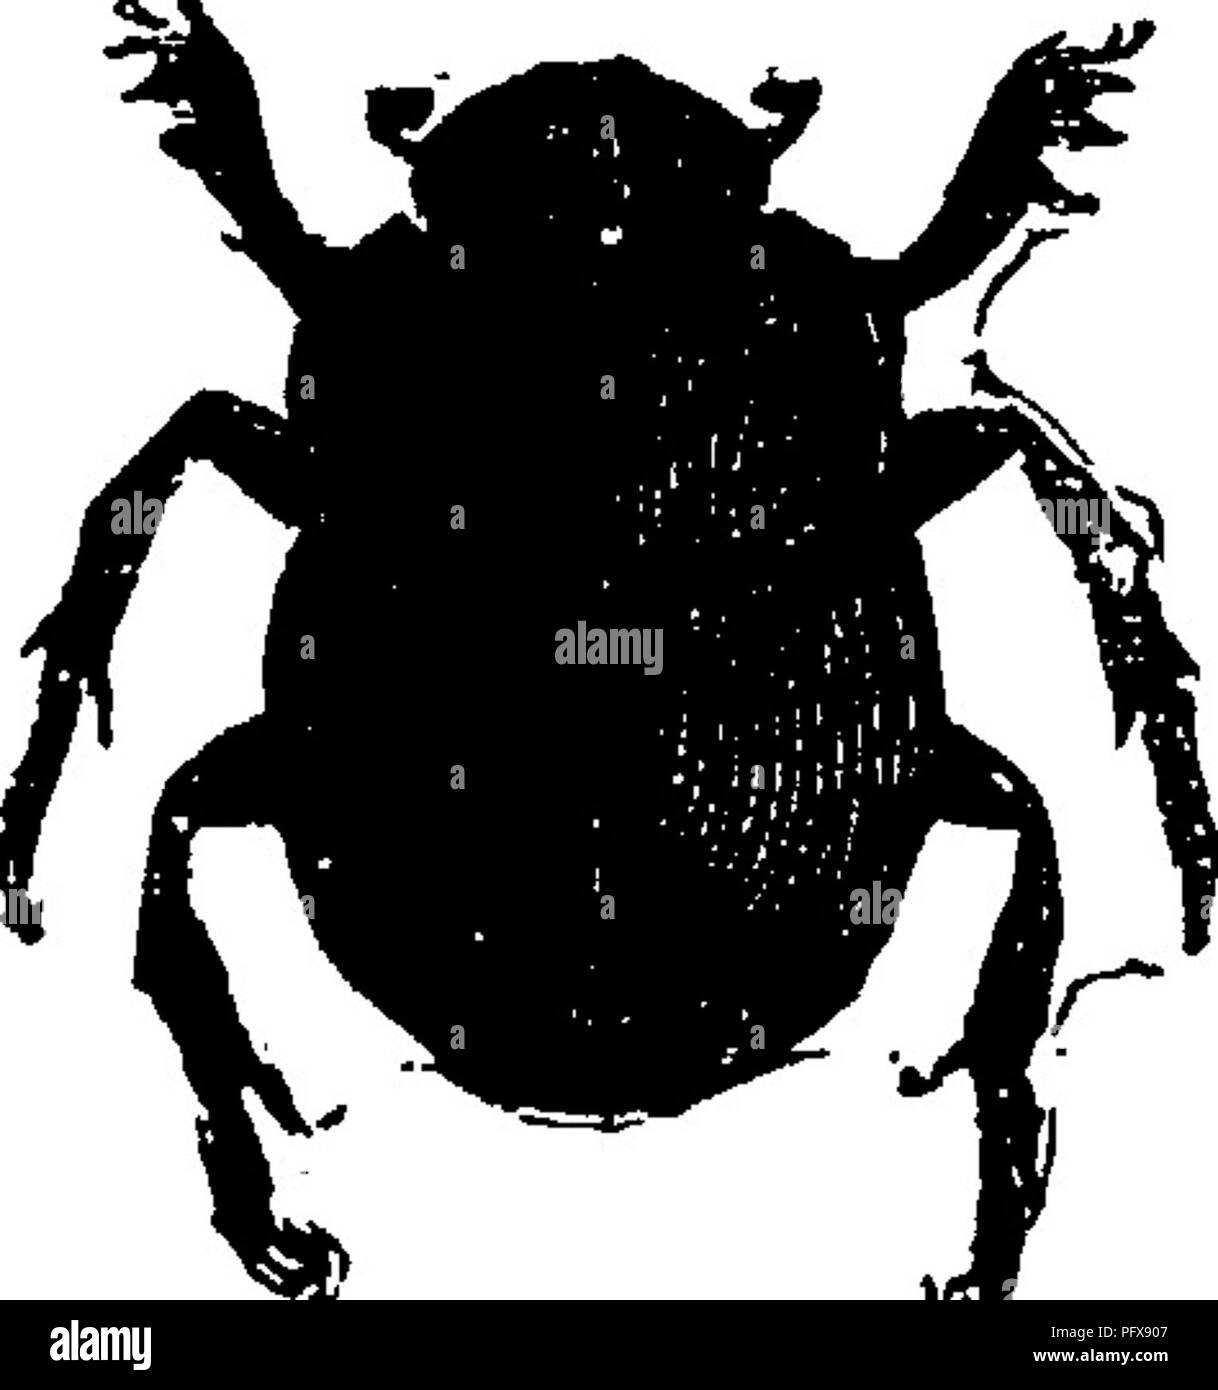 . A manual for the study of insects. Insects. 55^ THE STUDY OF INSECTS. viduals of this species were thought to be males, and a race of males symbolized a race of warriors. This latter super- stition w^as carried over to Rome, and the Roman soldiers wore images of the Sacred Beetle set in rings. Our common tumble-bugs are distributed among three genera : Cantkon, Copris, and Phanceiis. In the genus Can- thon (Can^thon) the middle and posterior tibiae are slender, and scarcely enlarged at the extremity. CantJwn Icevis (C. laeVis) is our most common species (Fig. 675). In Copris (Co^pris) and Ph Stock Photo